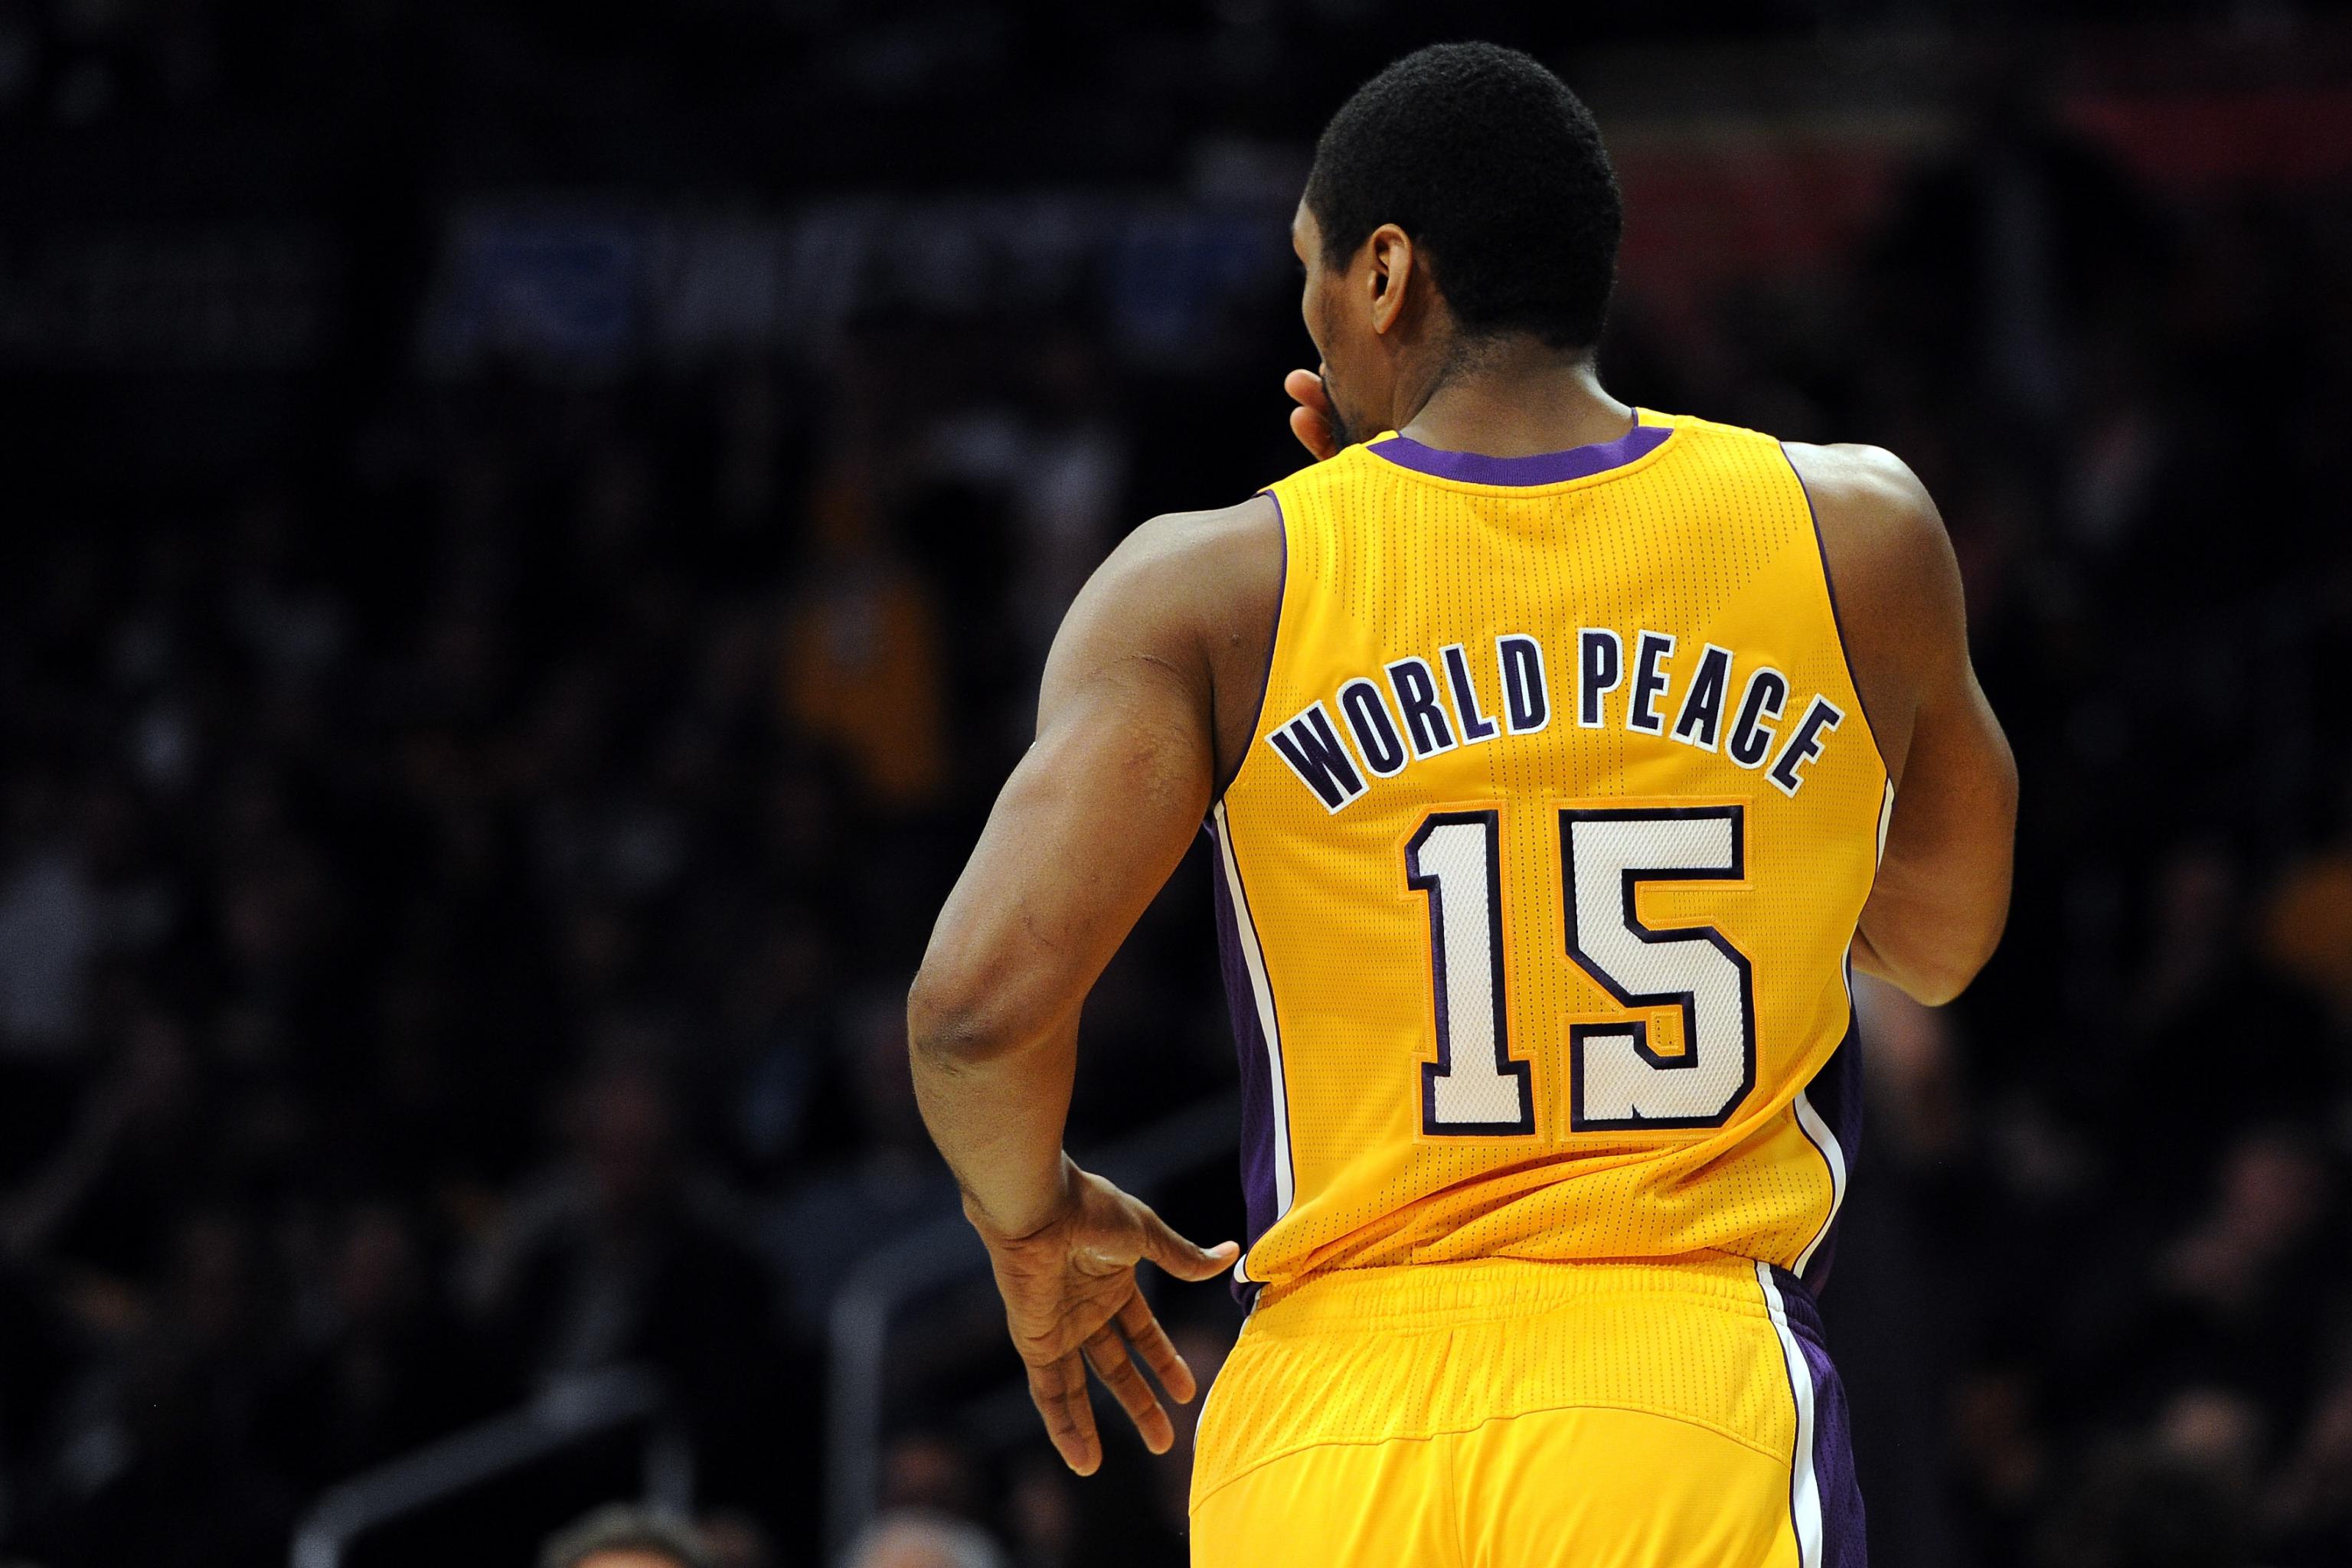 Metta World Peace says the Lakers want to go 73-9 - Sports Illustrated